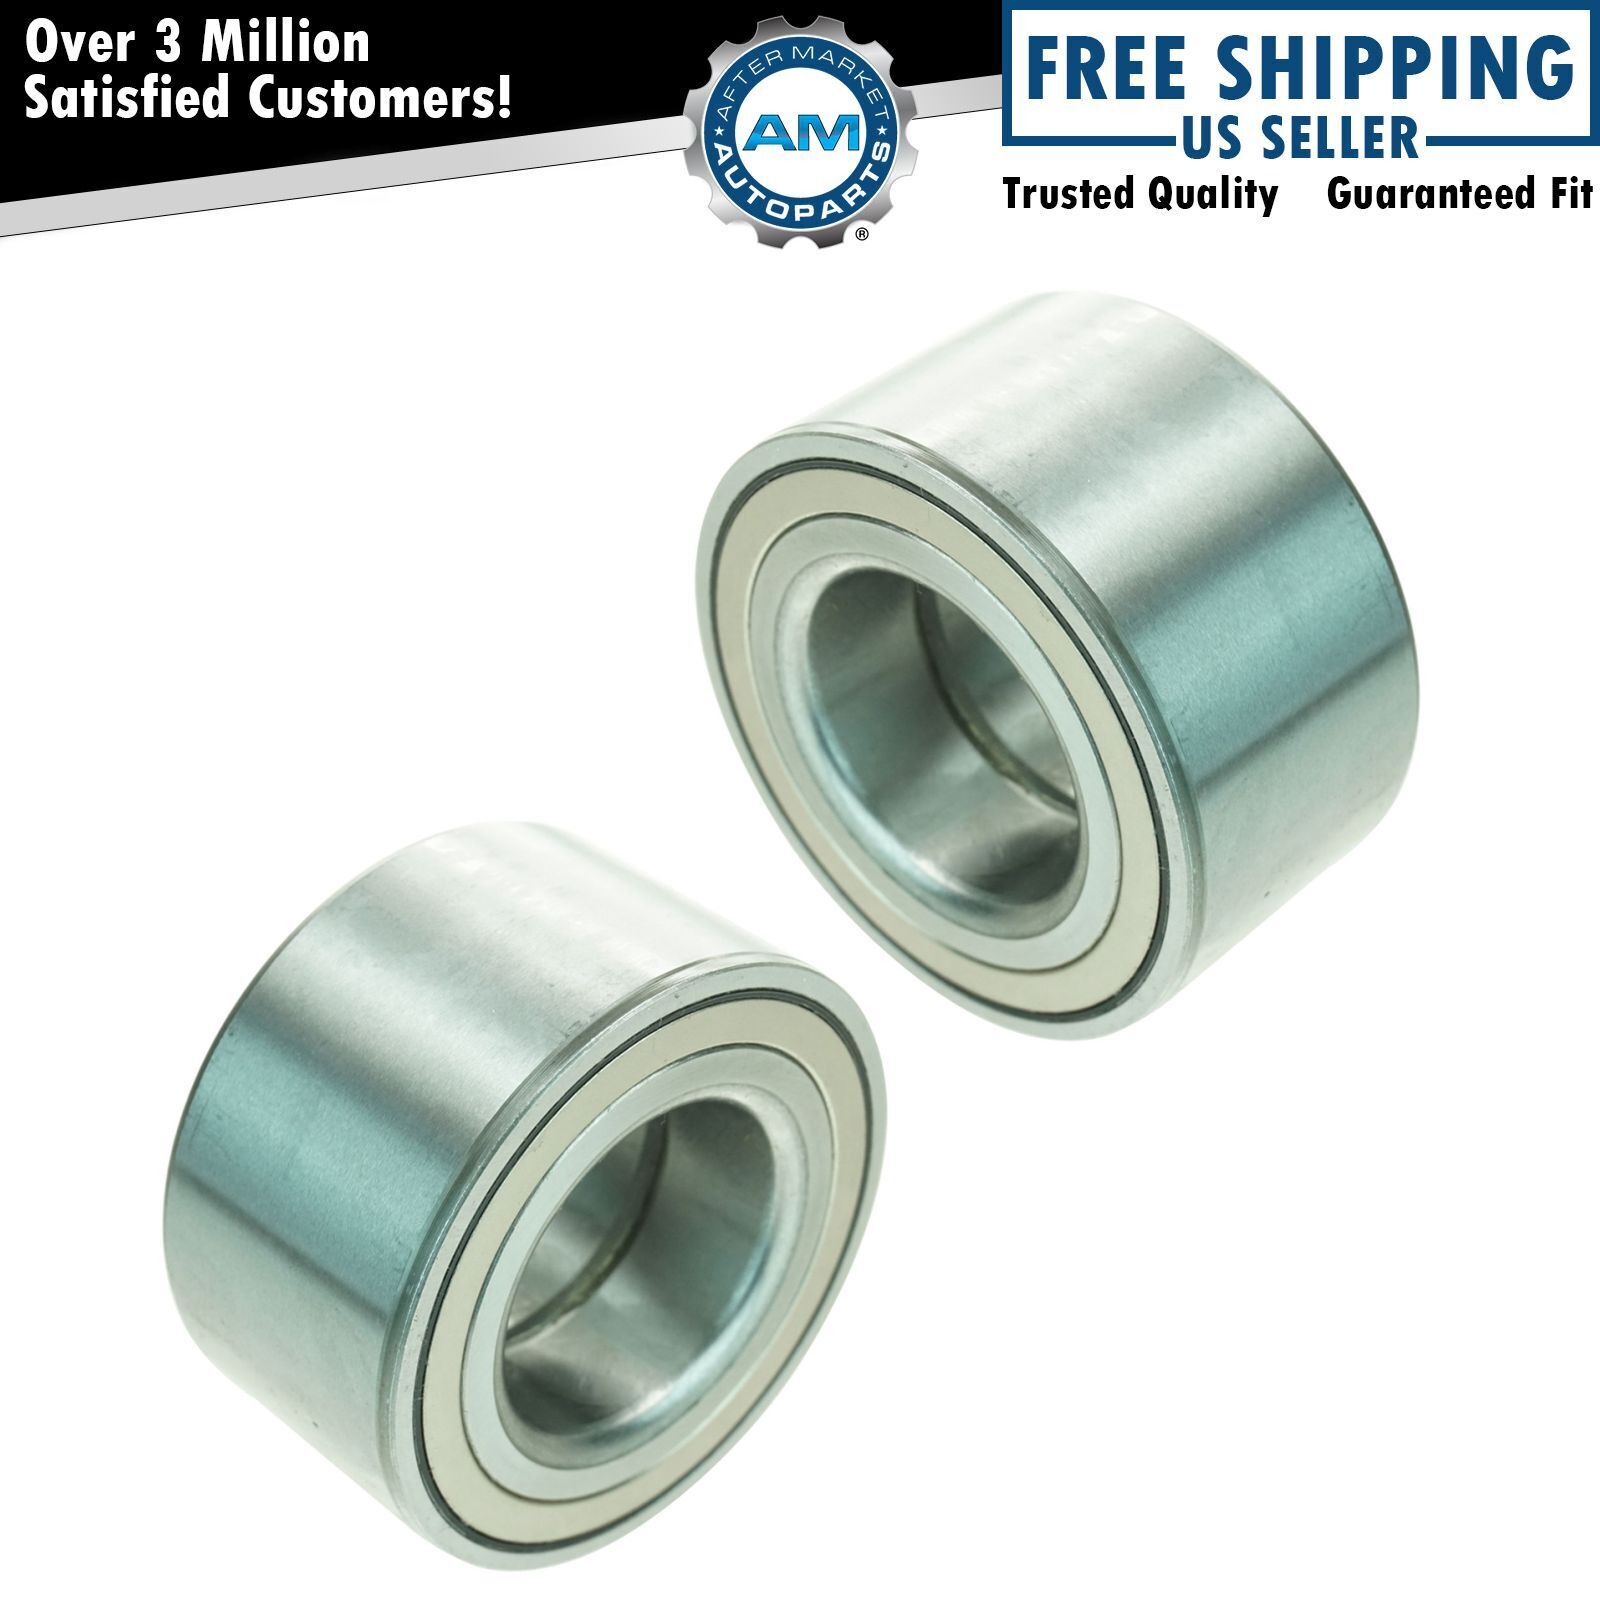 2 Front Wheel Bearing Fits Ford Edge Lexus ES330 RX330 RX350 Toyota Avalon Camry